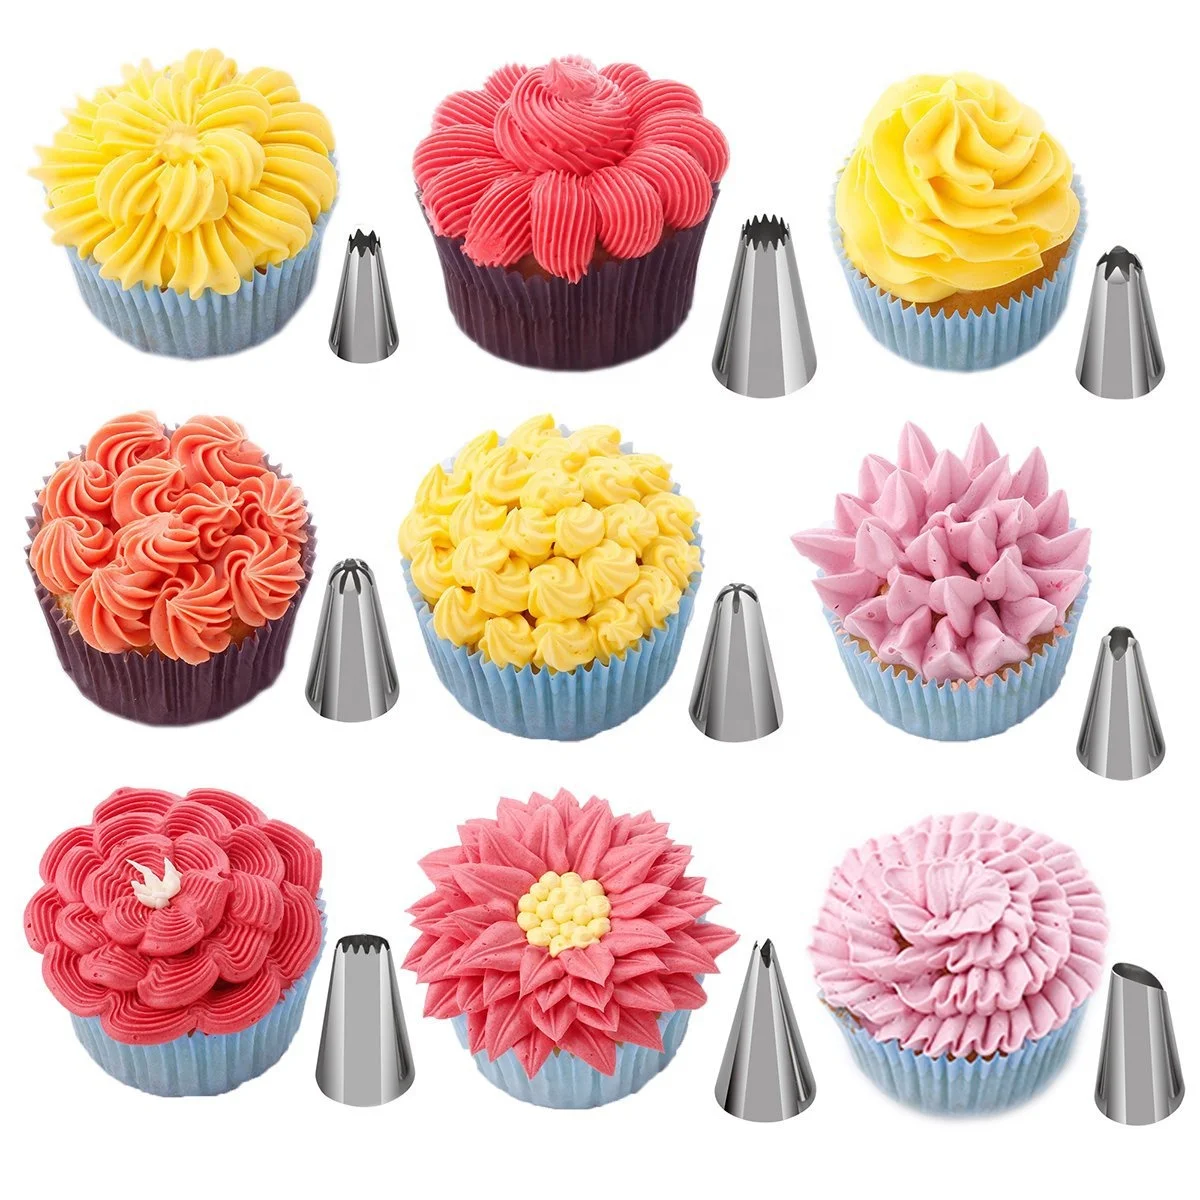 Factory 83 Pcs Cake Decorating Tools Kit Nozzles Piping Bags Cake Tools Accessories Pastry Baking Utensils